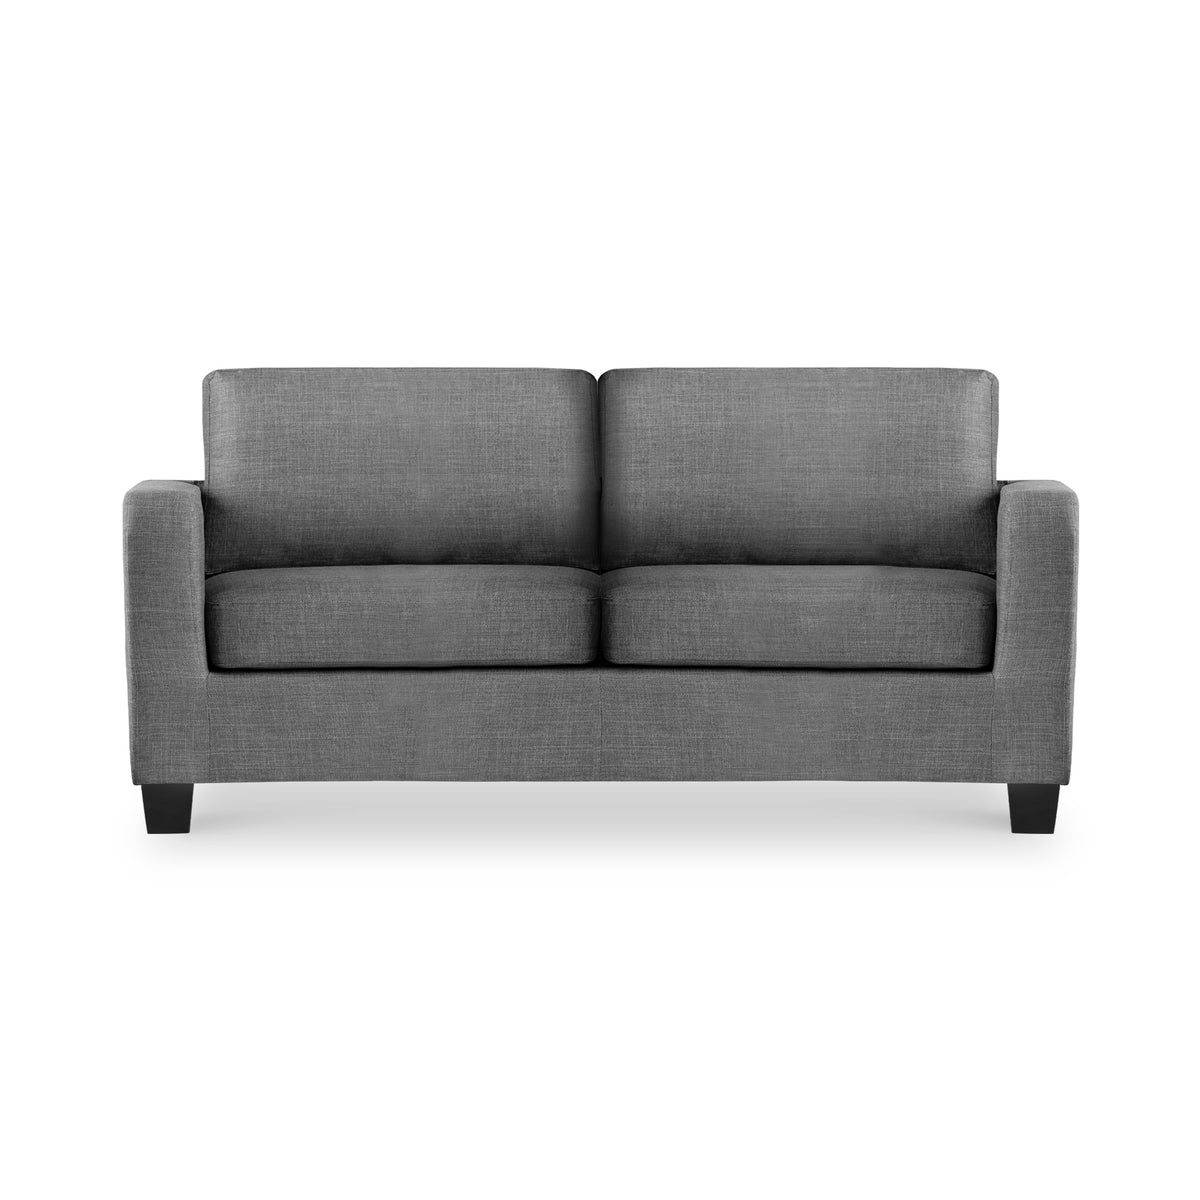 Myles Grey Fabric 3 Seater Sofa from Roseland Furniture